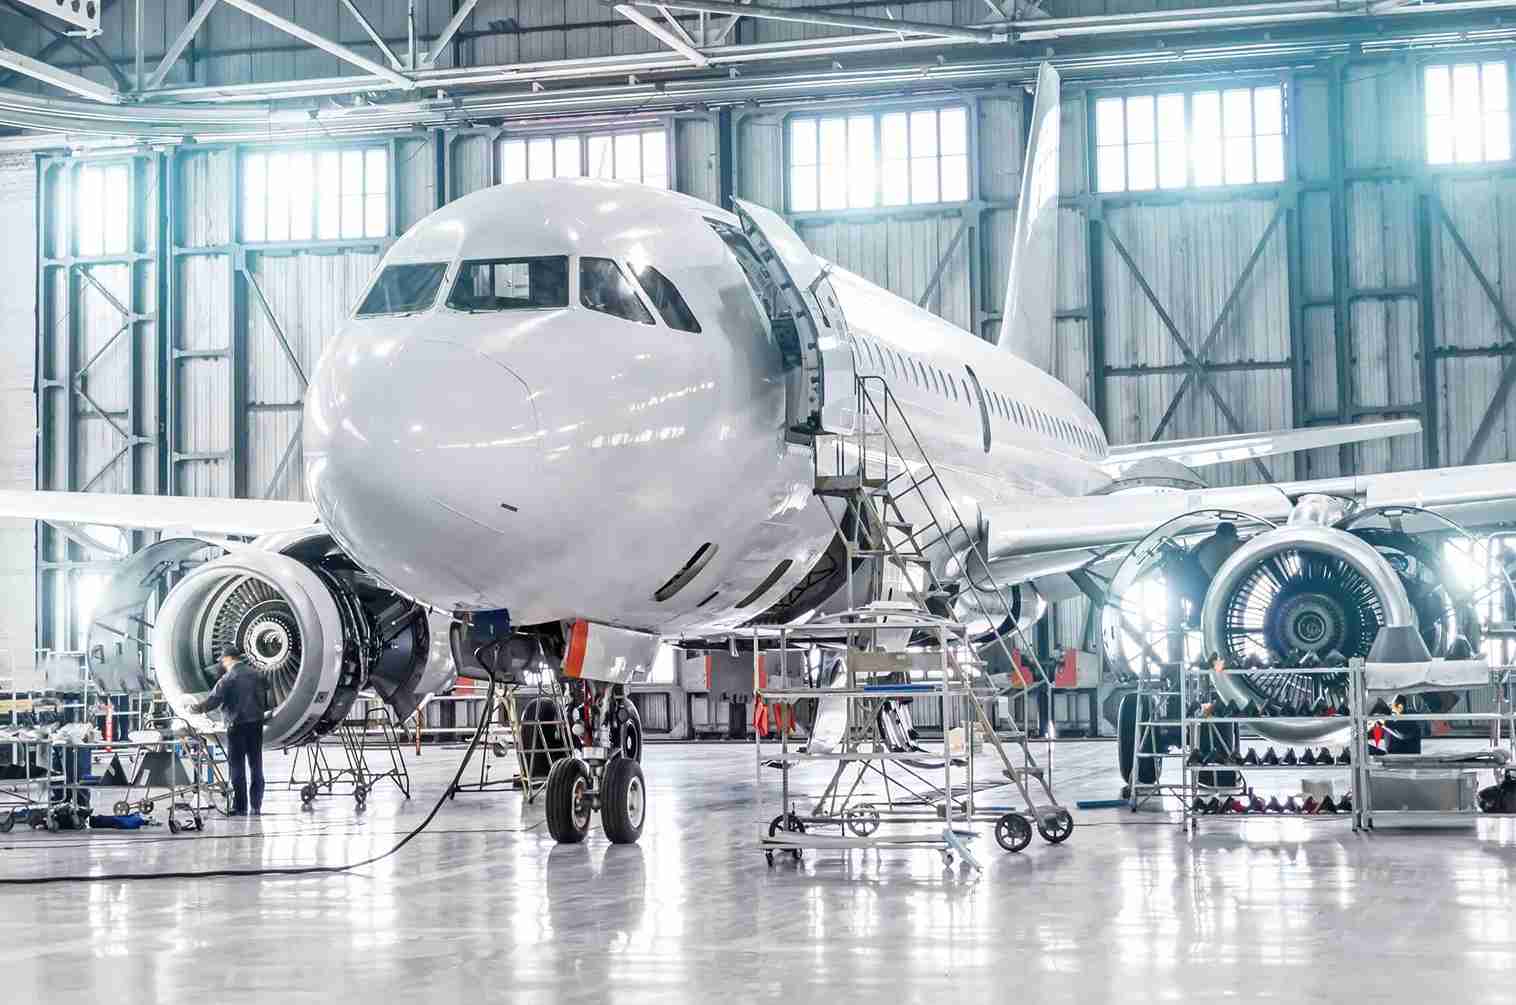 commercial jet plane in a hangar